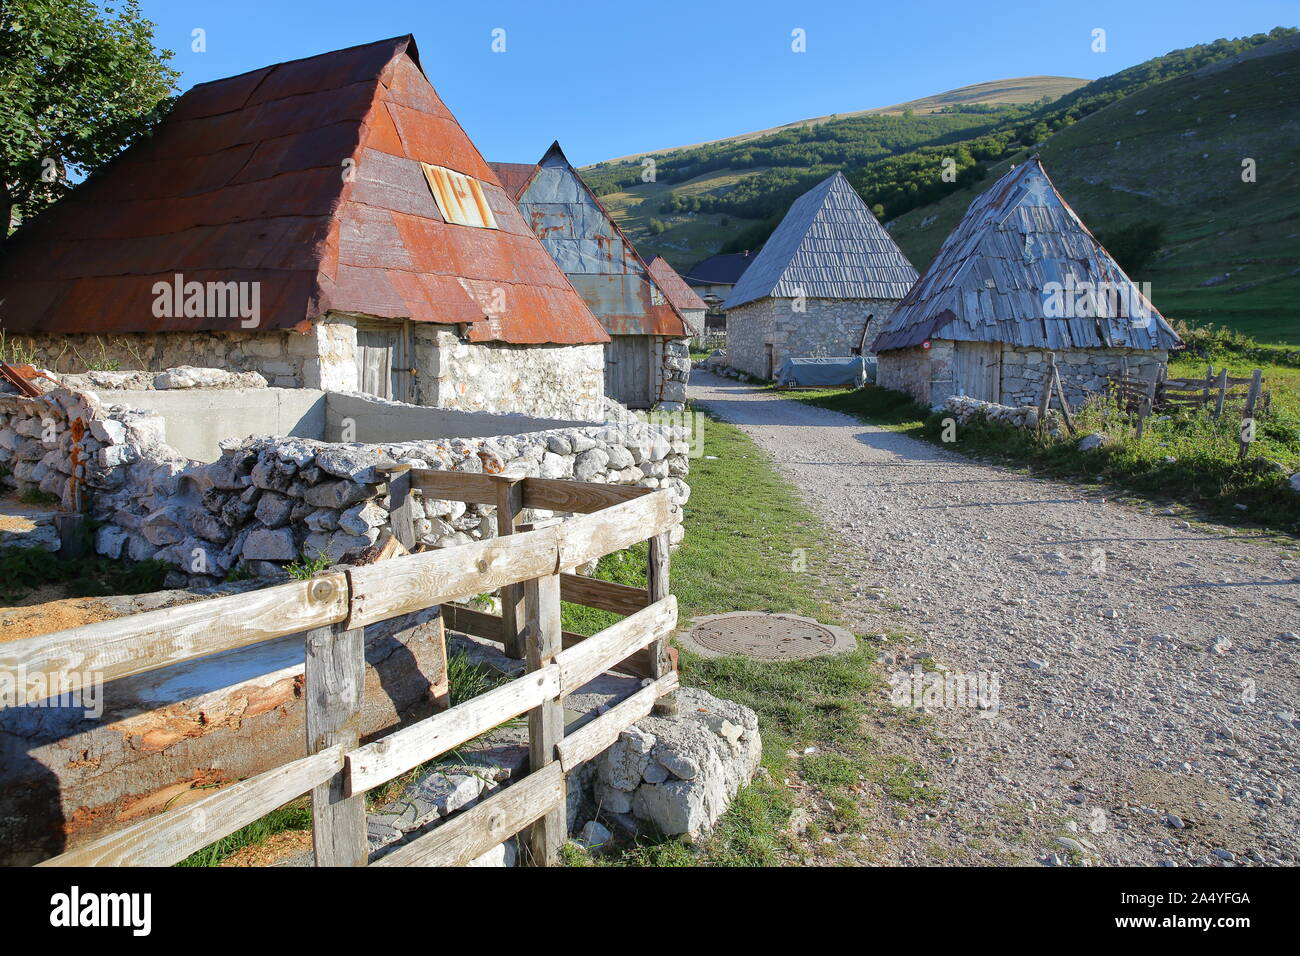 Traditional houses in Lukomir village, Bosnia's highest village at 1469 meters and the most remote in the entire country, Bosnia and Herzegovina Stock Photo